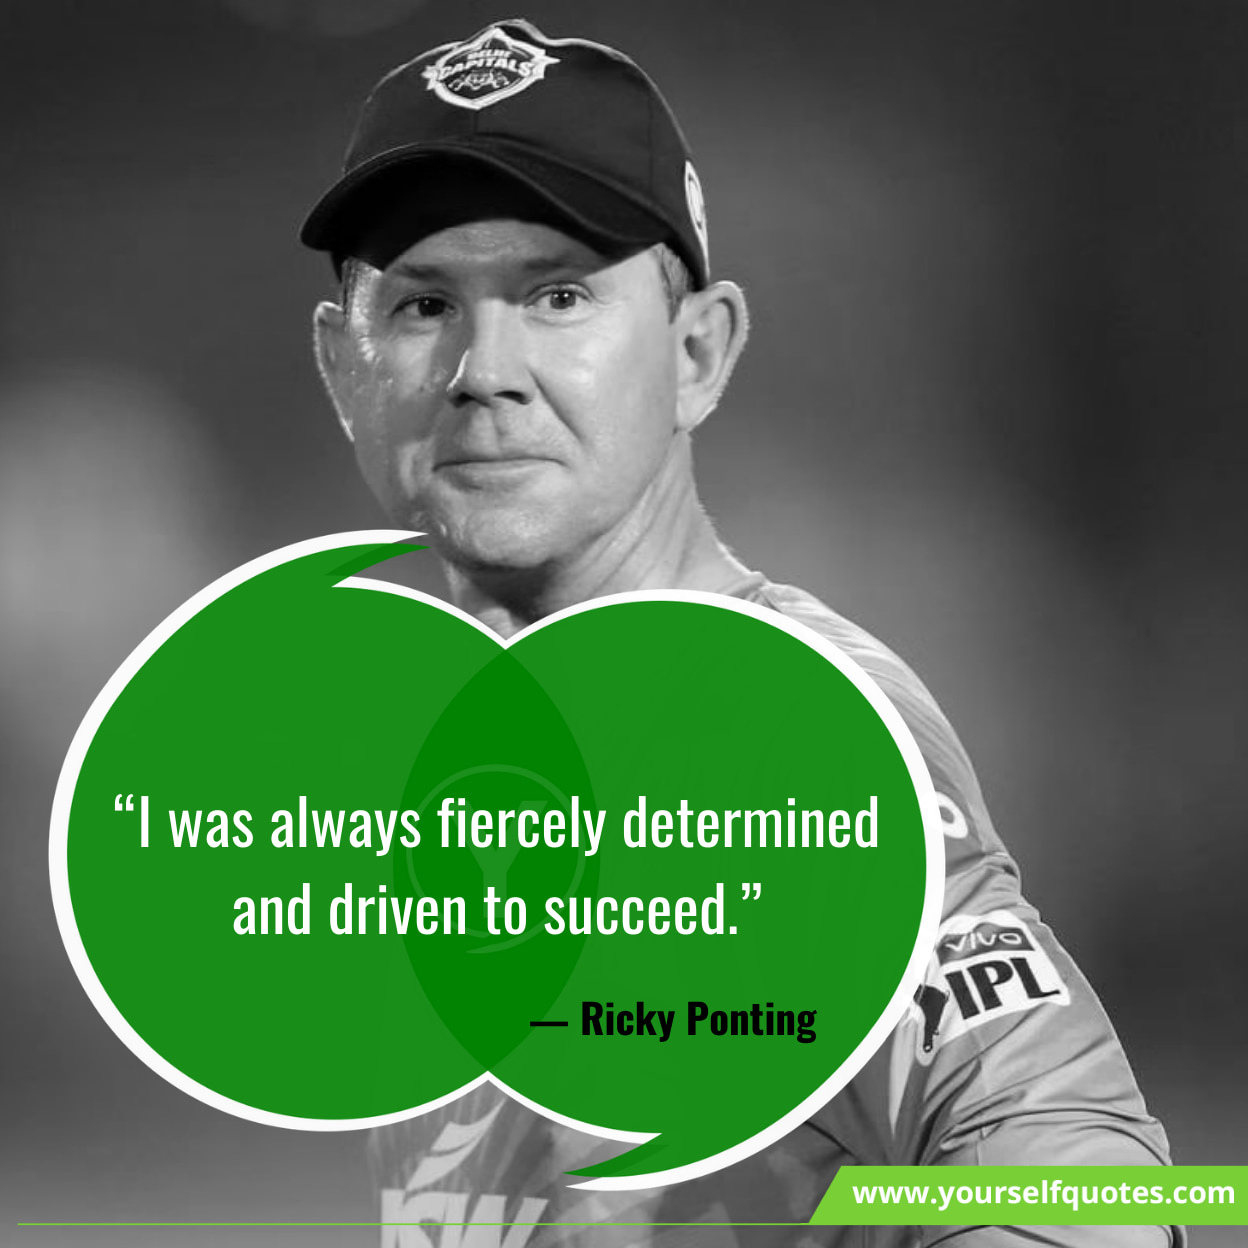 Cricket Quotes By Famous Cricketer's